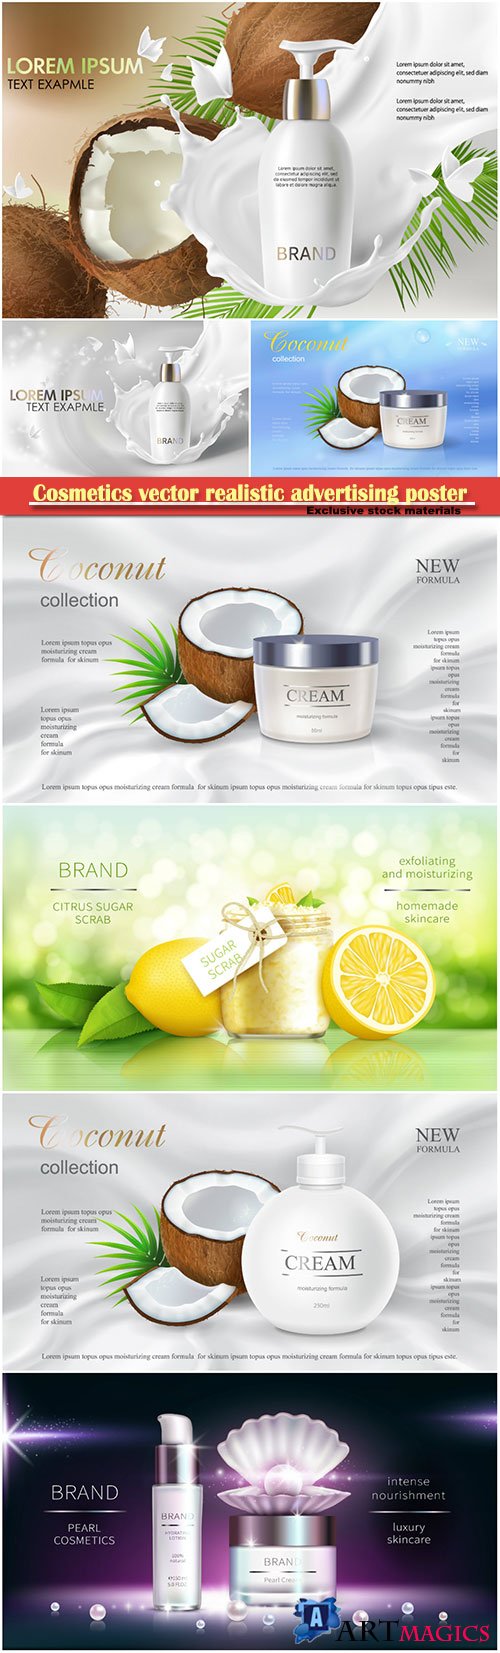 Cosmetics vector realistic advertising poster, packaging for cosmetic products, mockup for glossy magazine